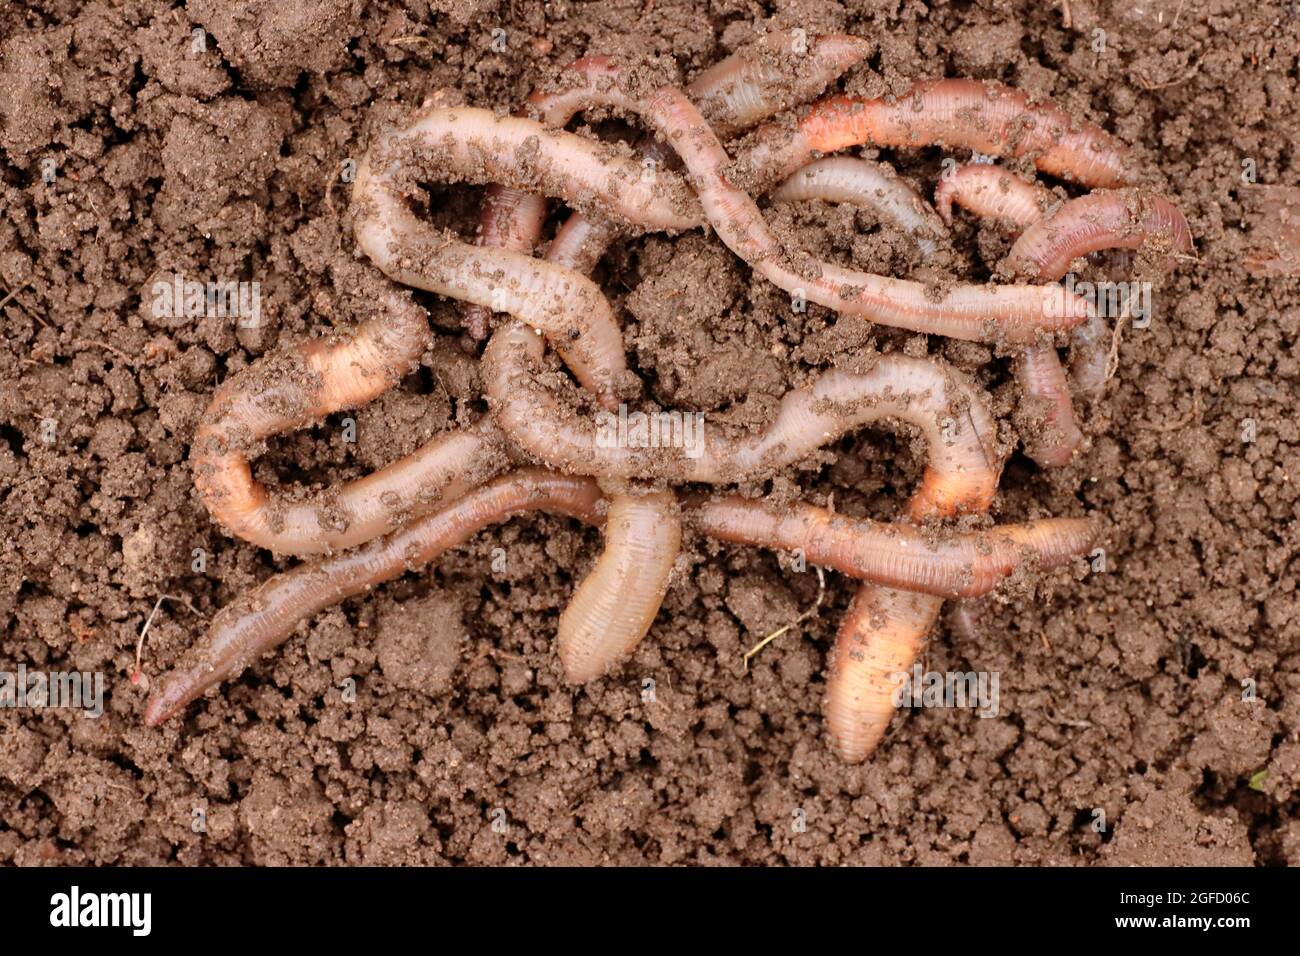 Earthworm on the ground, one close-up. Used in agriculture and fishing. Stock Photo